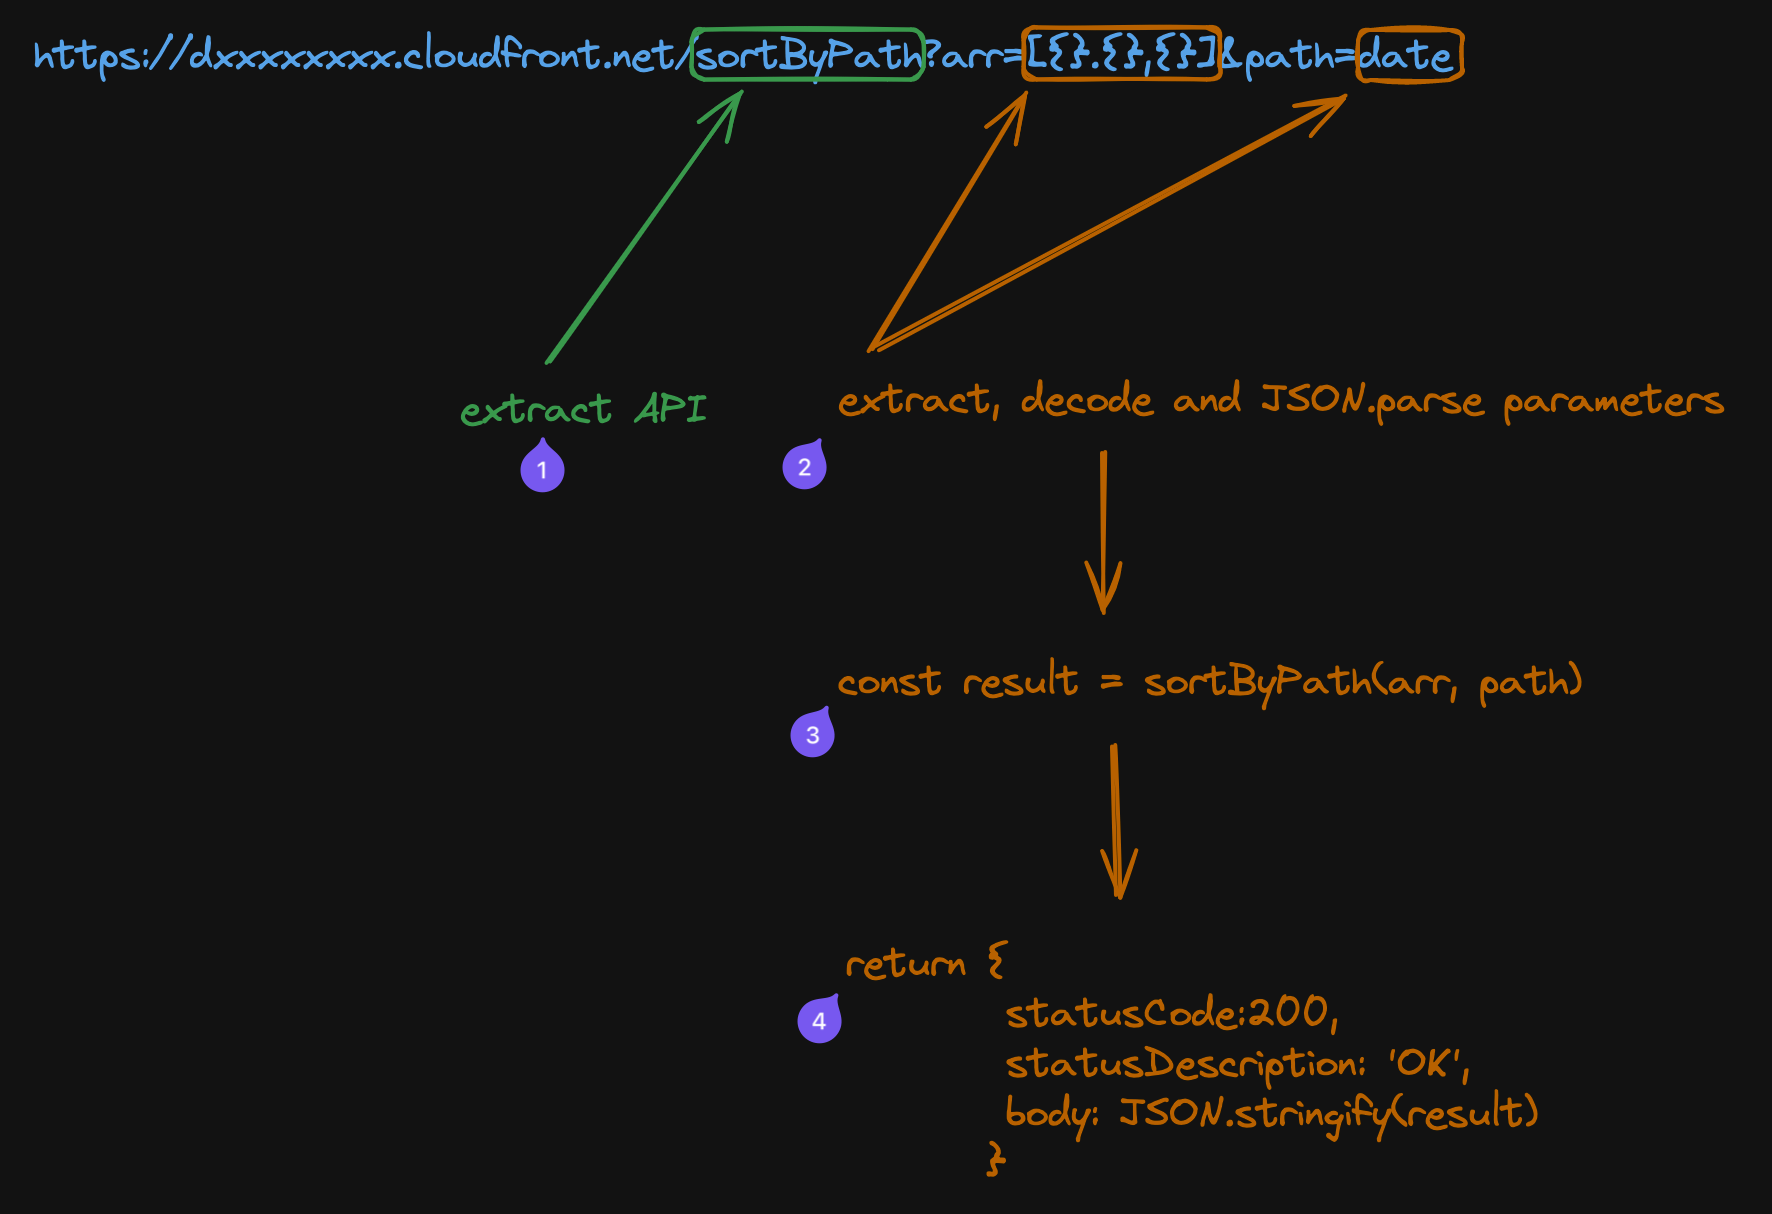 CloudFront function REST API visualized